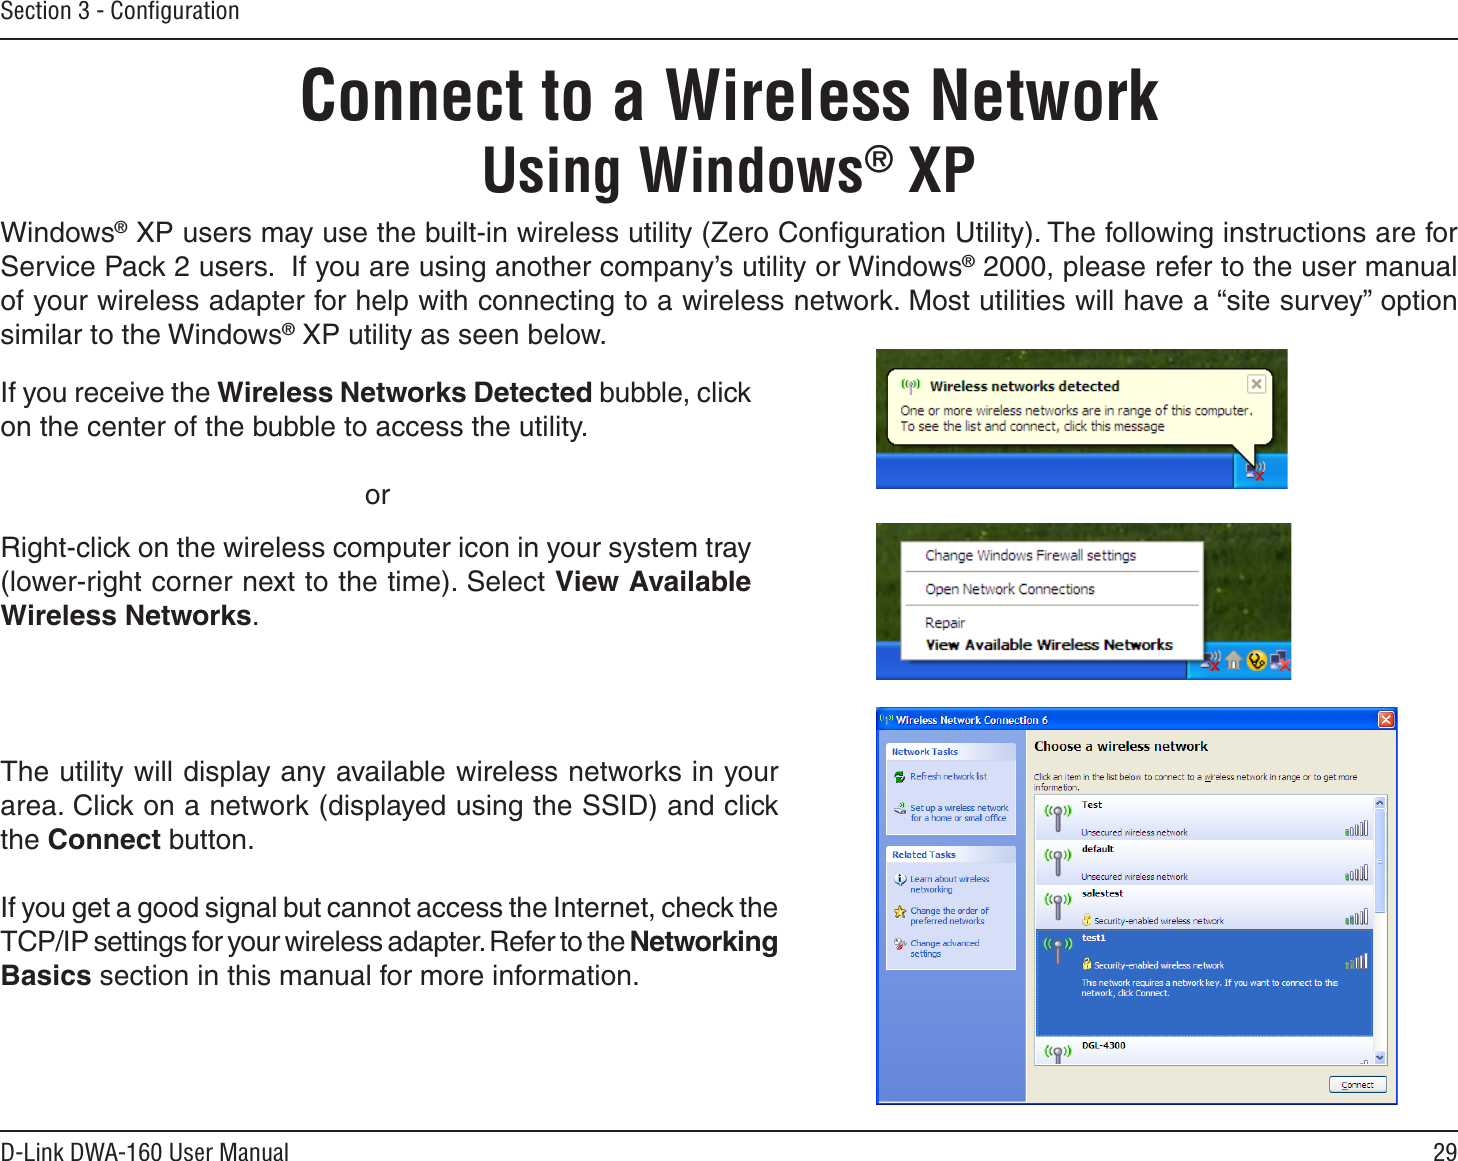 29D-Link DWA-160 User ManualSection 3 - ConﬁgurationConnect to a Wireless NetworkUsing Windows® XPWindows® XP users may use the built-in wireless utility (Zero Conﬁguration Utility). The following instructions are for Service Pack 2 users.  If you are using another company’s utility or Windows® 2000, please refer to the user manual of your wireless adapter for help with connecting to a wireless network. Most utilities will have a “site survey” option similar to the Windows® XP utility as seen below.Right-click on the wireless computer icon in your system tray (lower-right corner next to the time). Select View Available Wireless Networks.If you receive the Wireless Networks Detected bubble, click on the center of the bubble to access the utility.     orThe utility will display any available wireless networks in your area. Click on a network (displayed using the SSID) and click the Connect button.If you get a good signal but cannot access the Internet, check the TCP/IP settings for your wireless adapter. Refer to the Networking Basics section in this manual for more information.